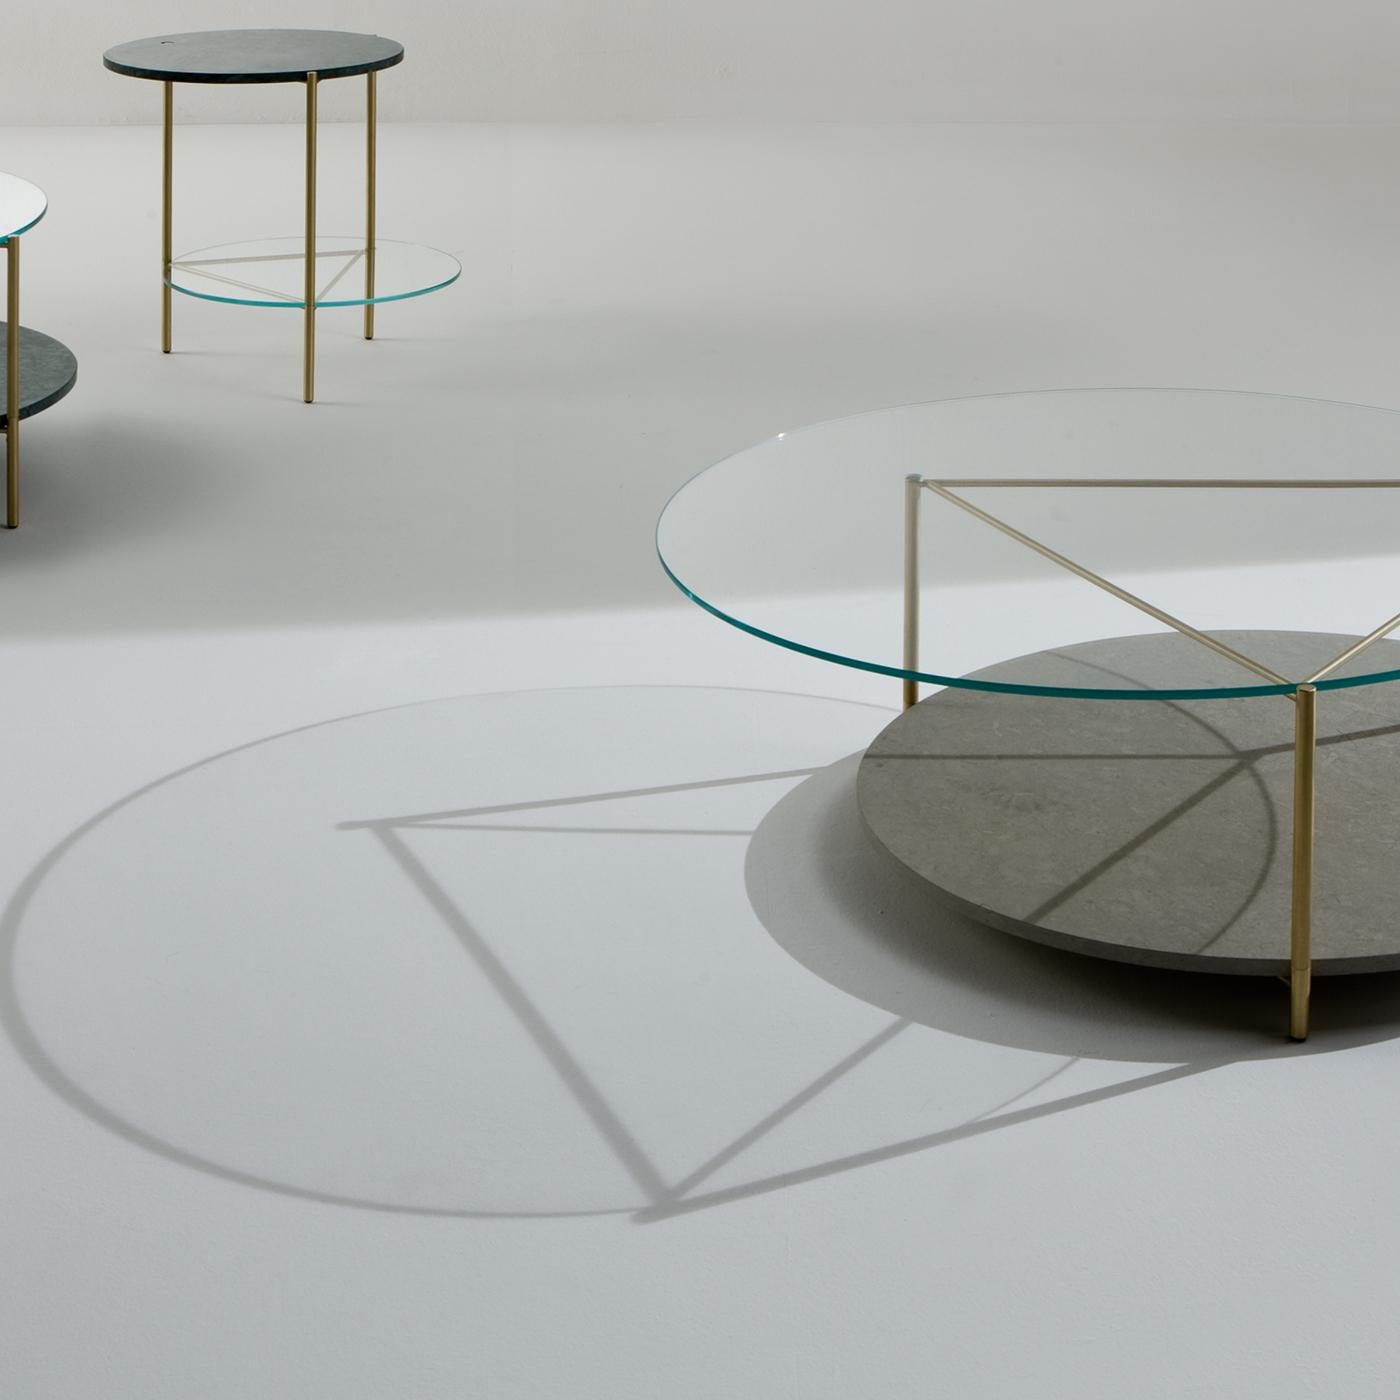 Echo tables allow the customer to create unique combinations with one of two shelves in different marble varieties depending on their individual taste and creativity. This dynamic and sophisticated Echo Coffee Table is crafted in satin brass with